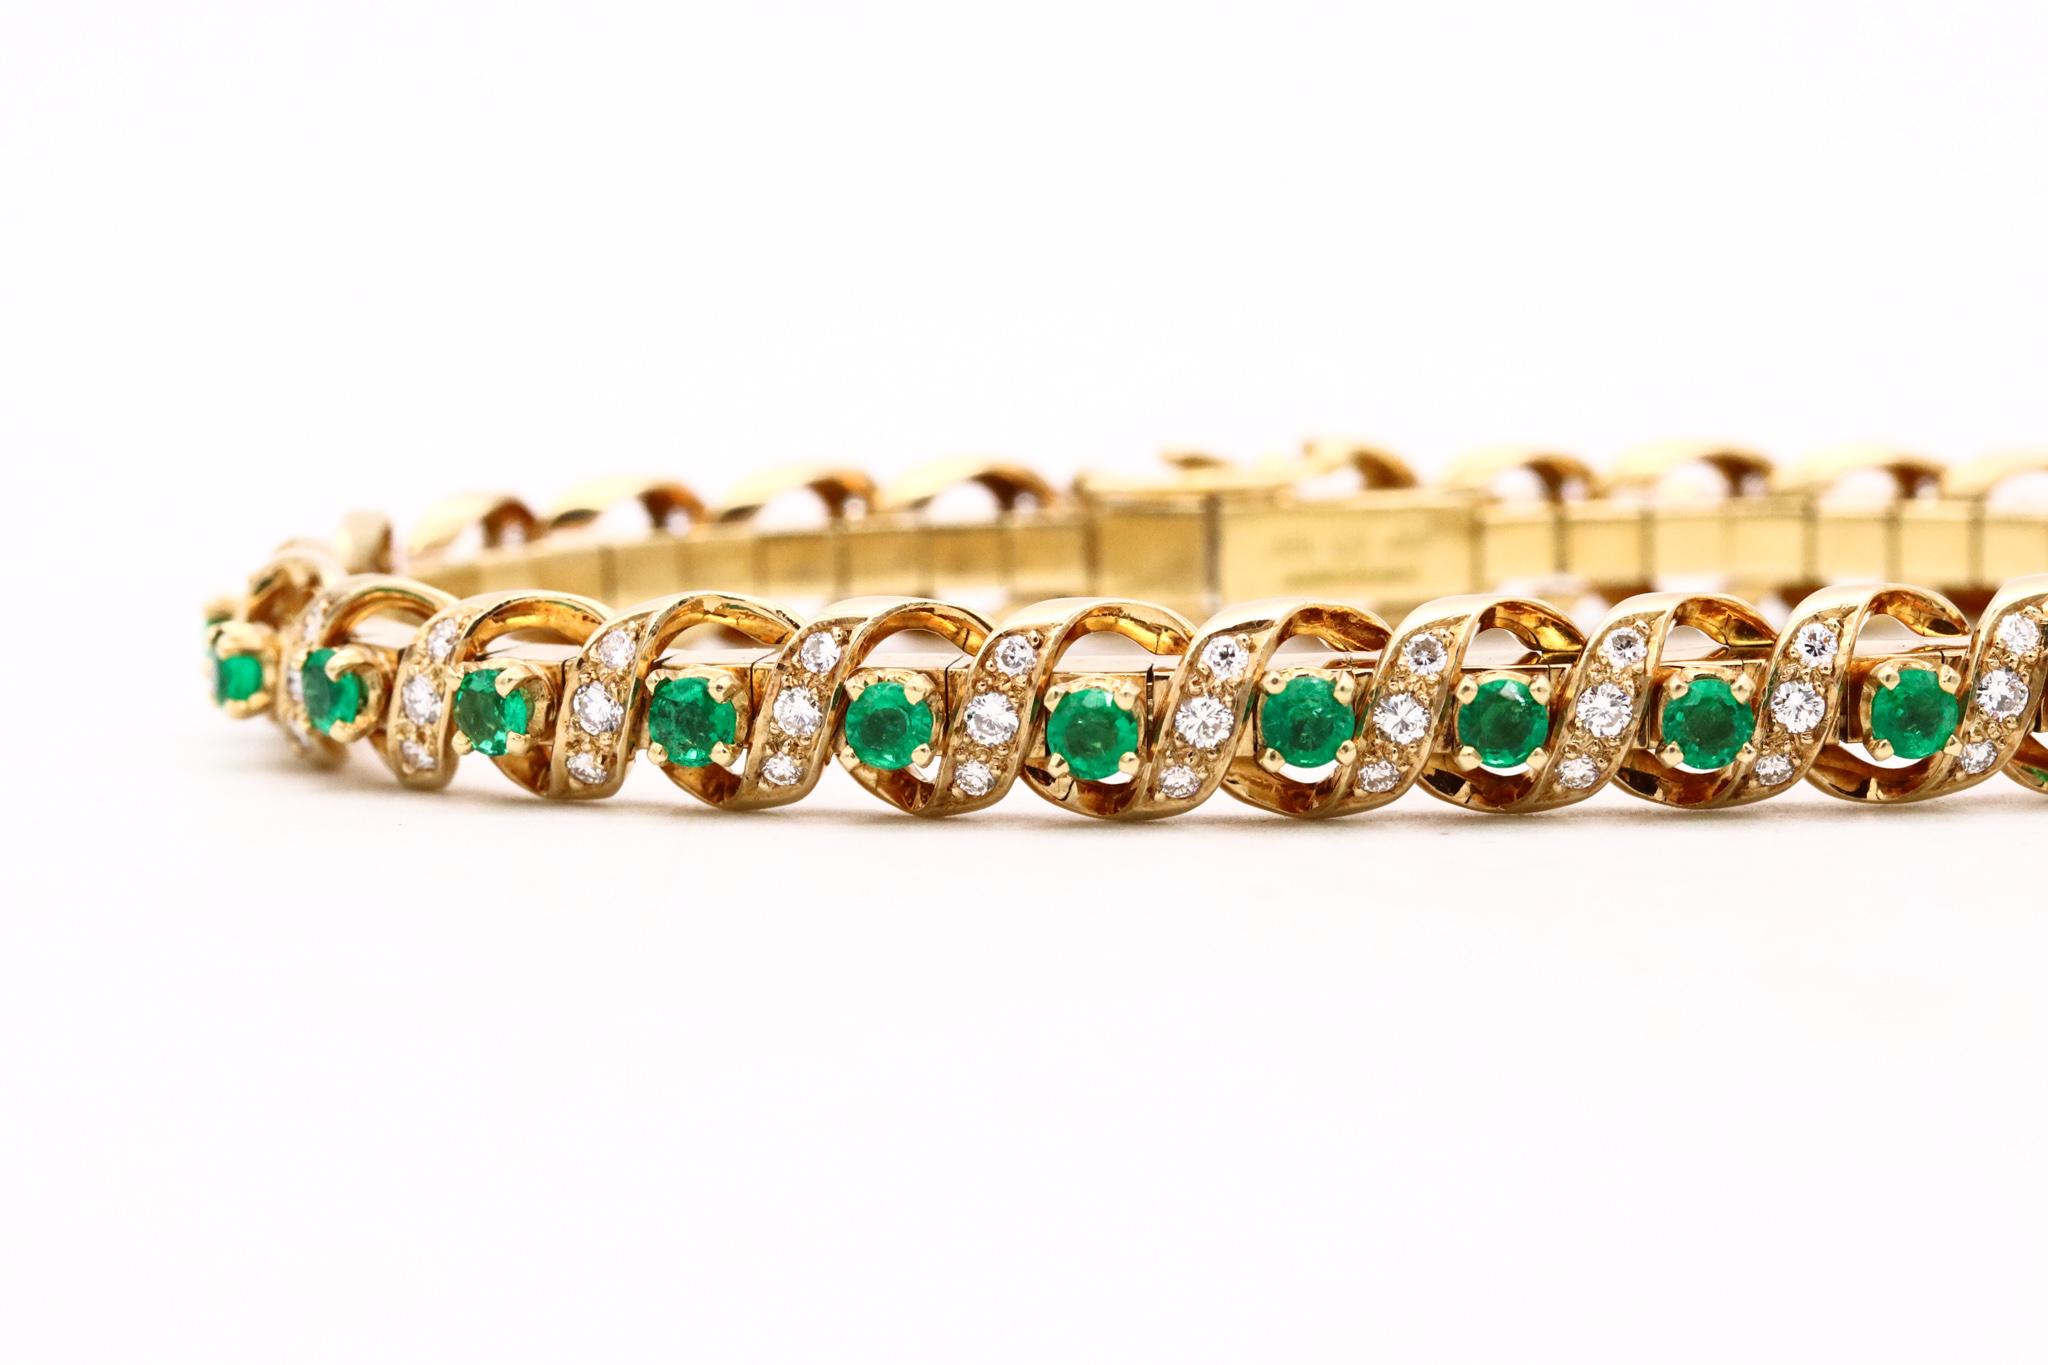 Gubelin 1960 Swiss 18kt Gold Bracelet 4.64 Ctw Colombian Emeralds and Diamonds In Excellent Condition For Sale In Miami, FL